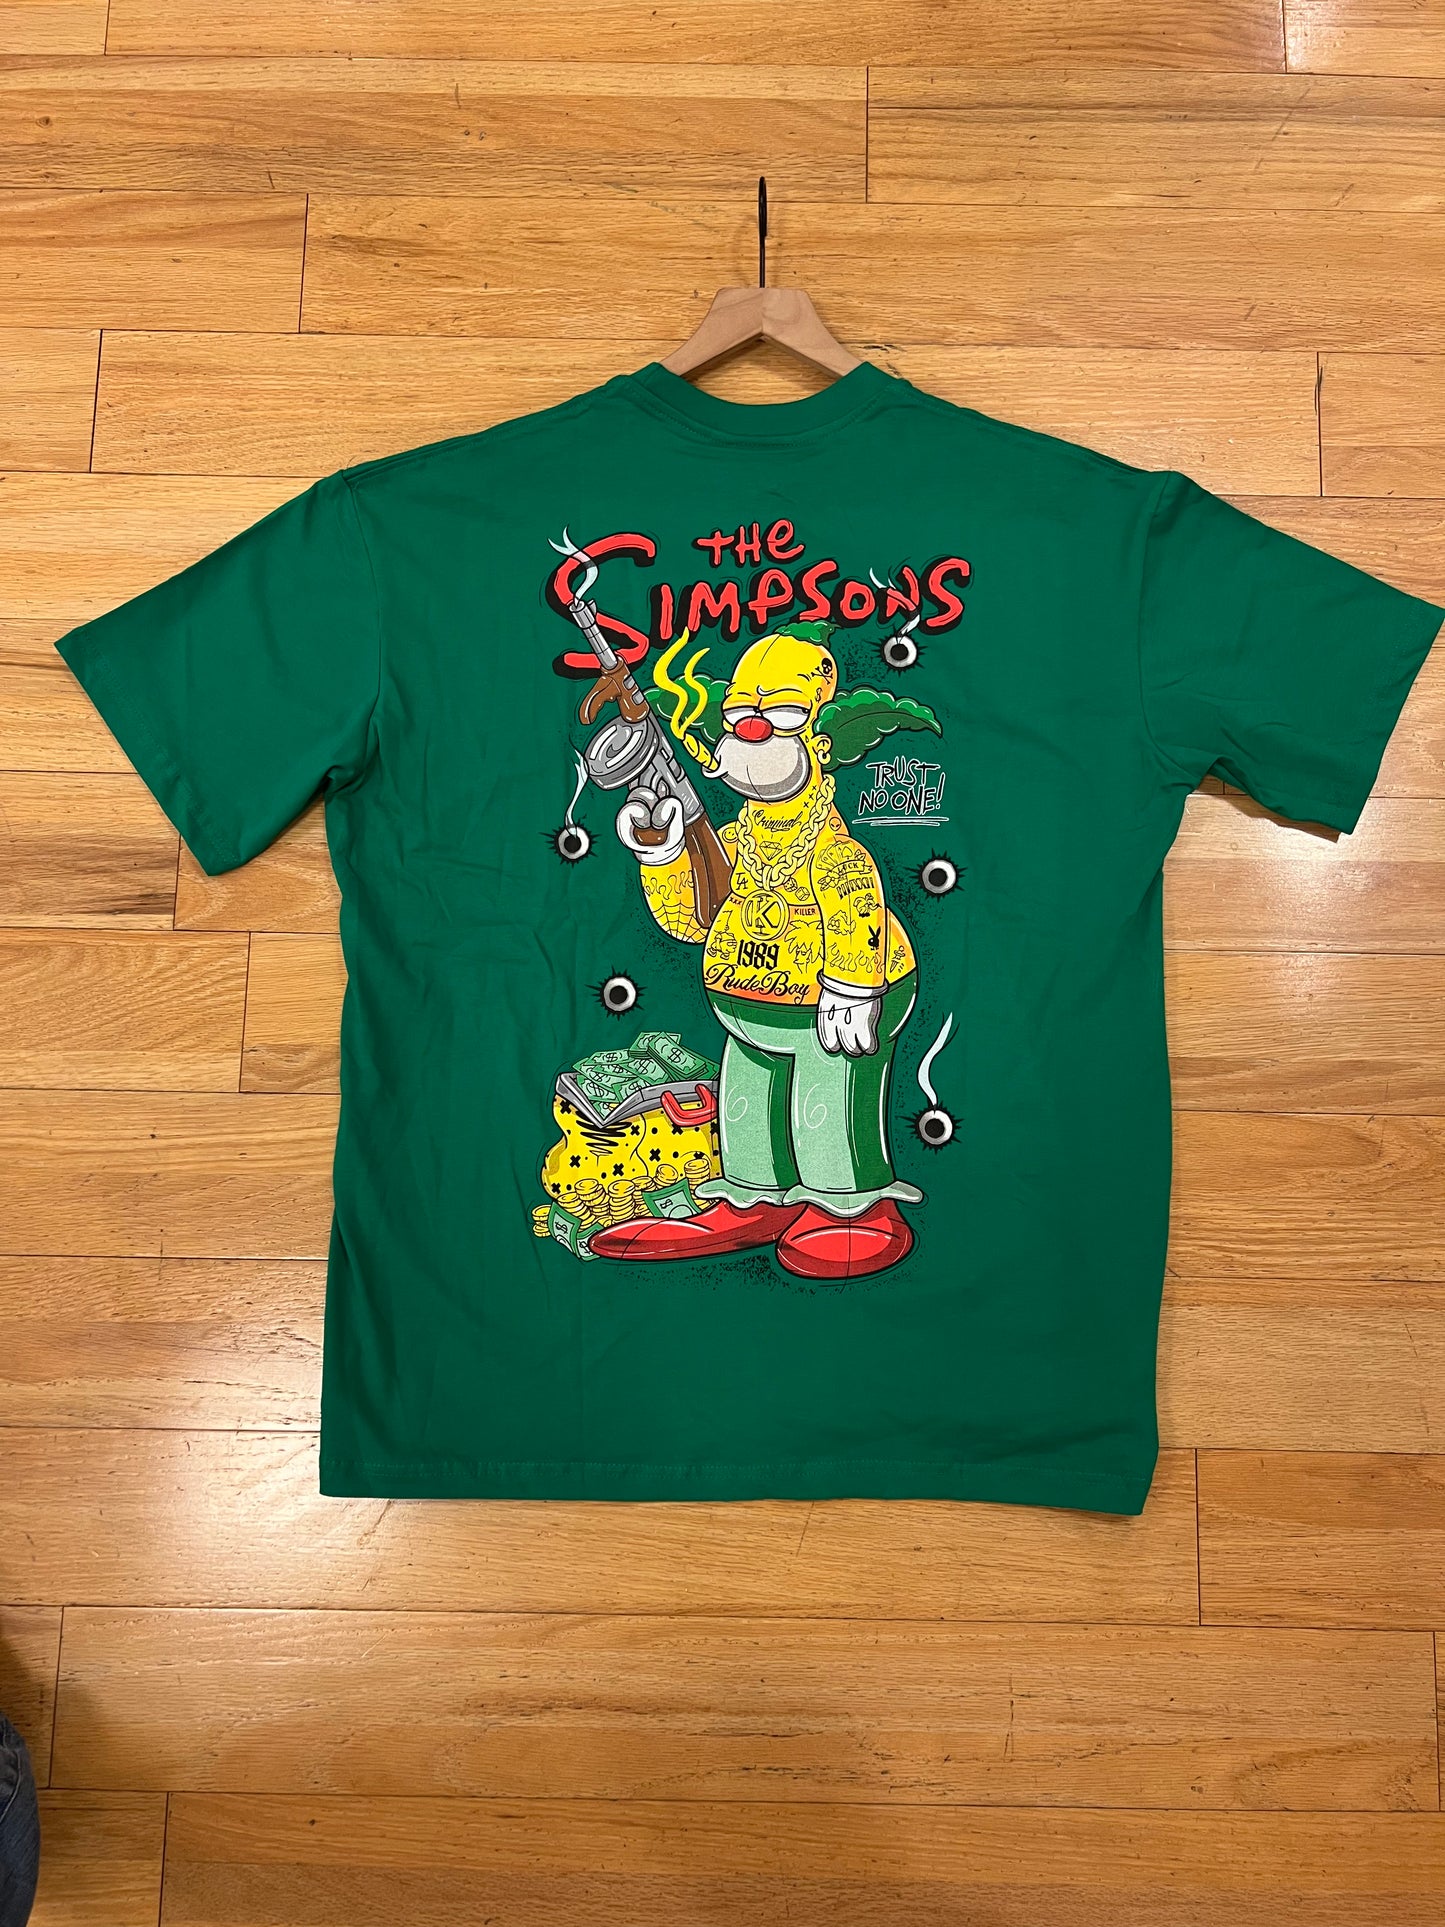 The Simpsons shirt